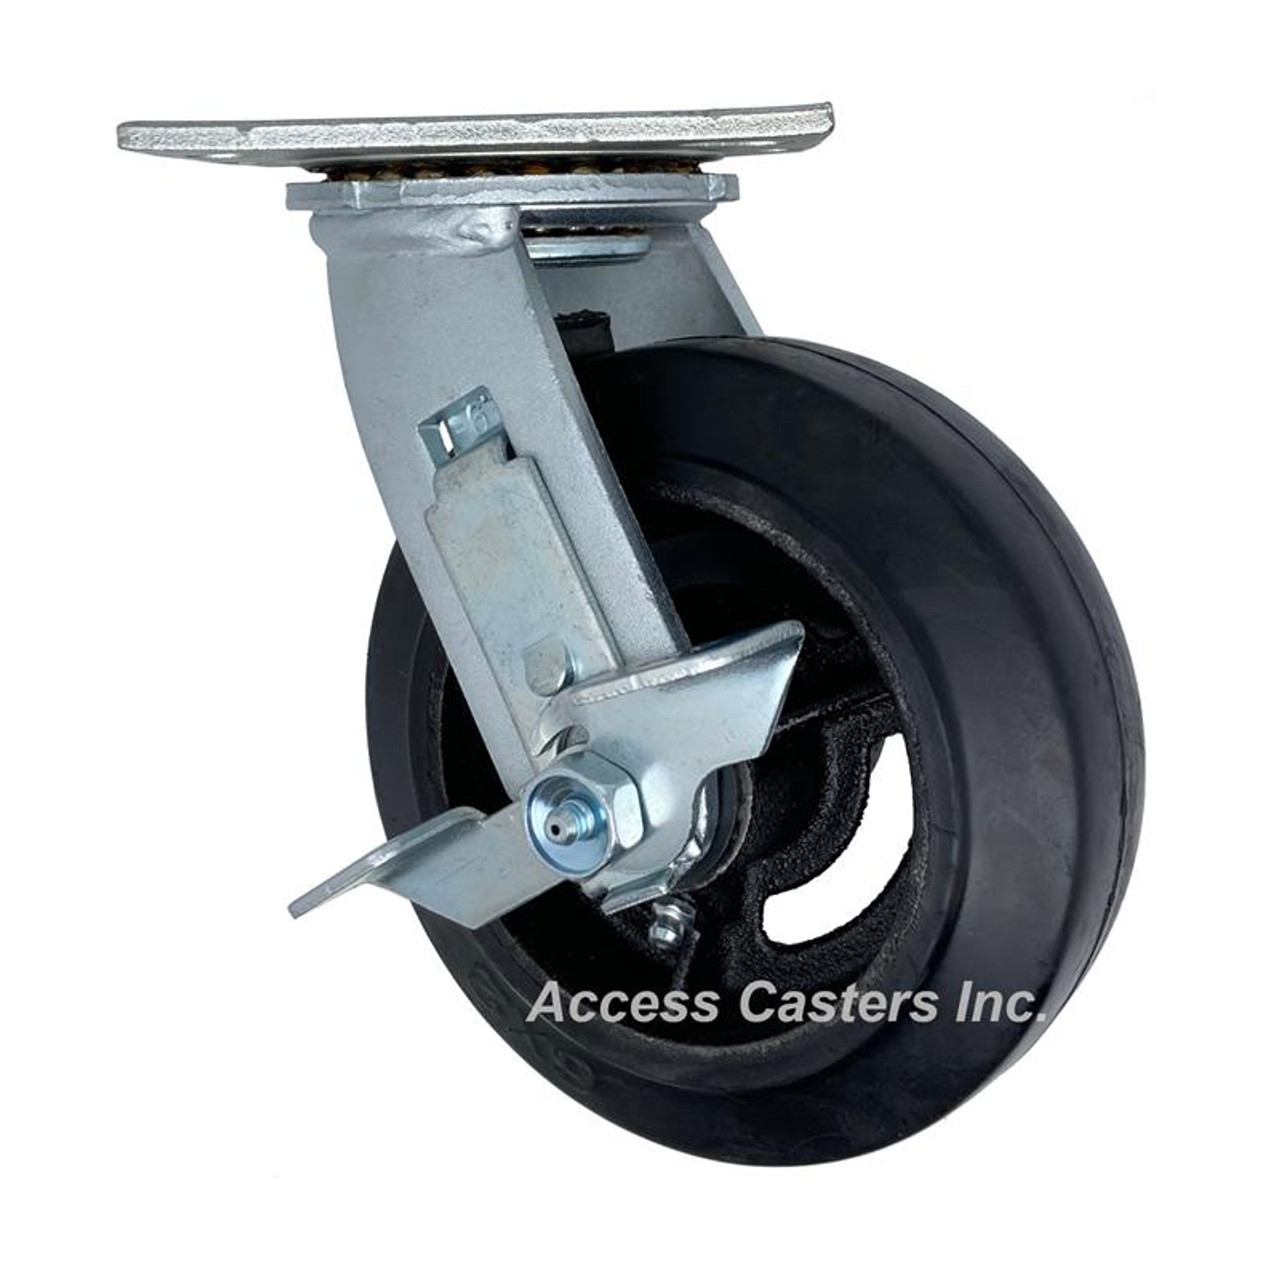 6PRCSB 6" moldon rubber swivel caster with brake